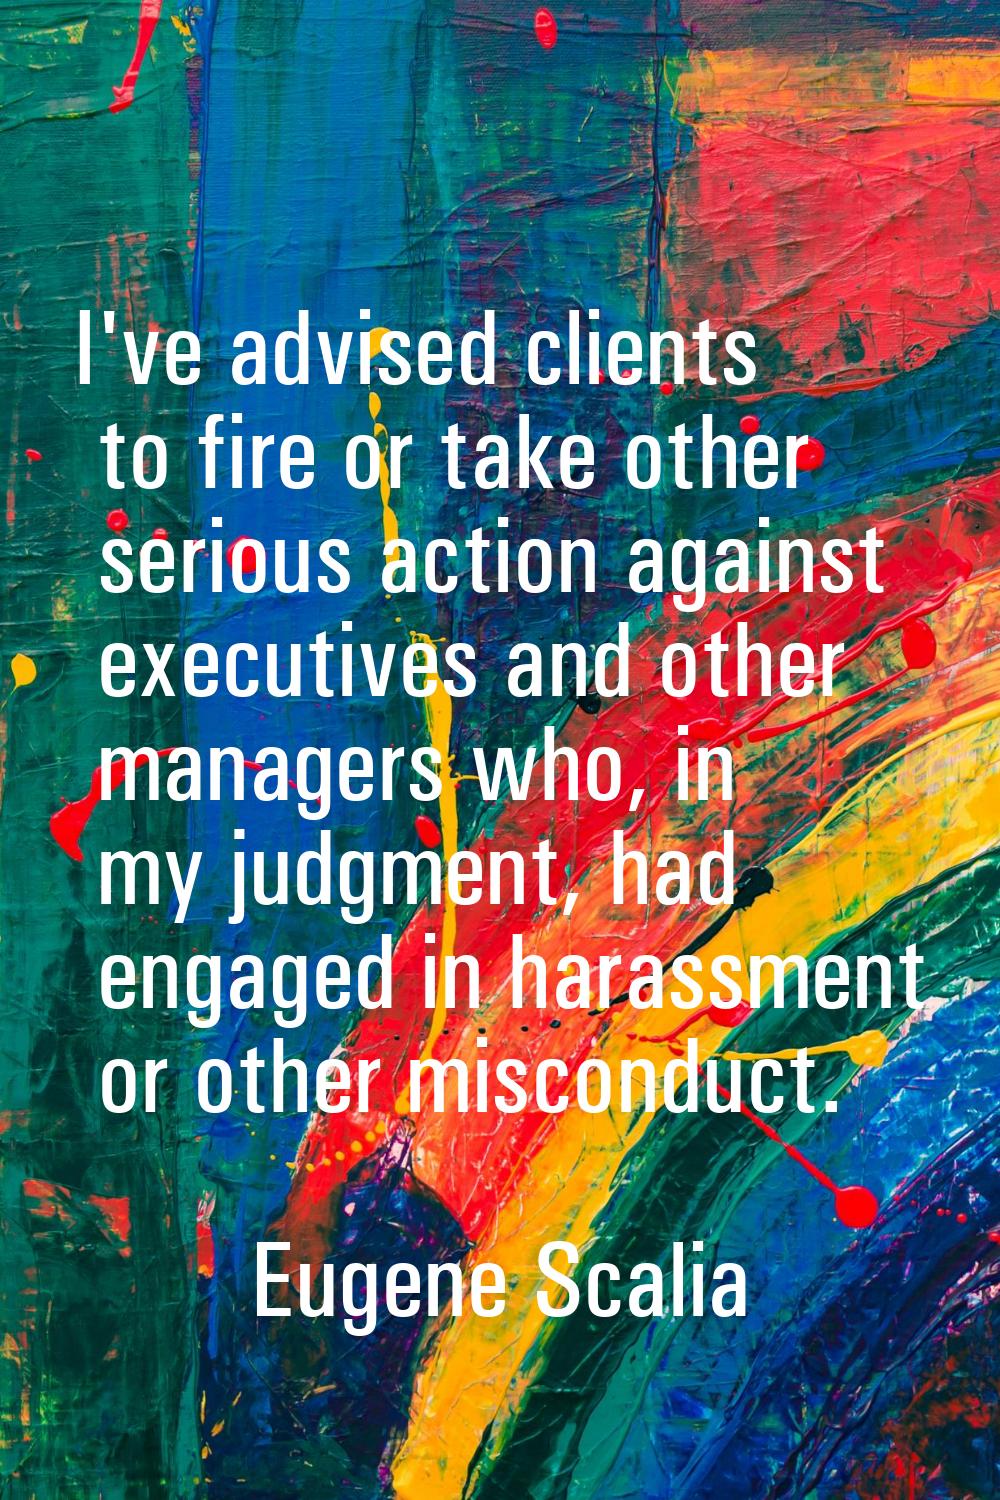 I've advised clients to fire or take other serious action against executives and other managers who